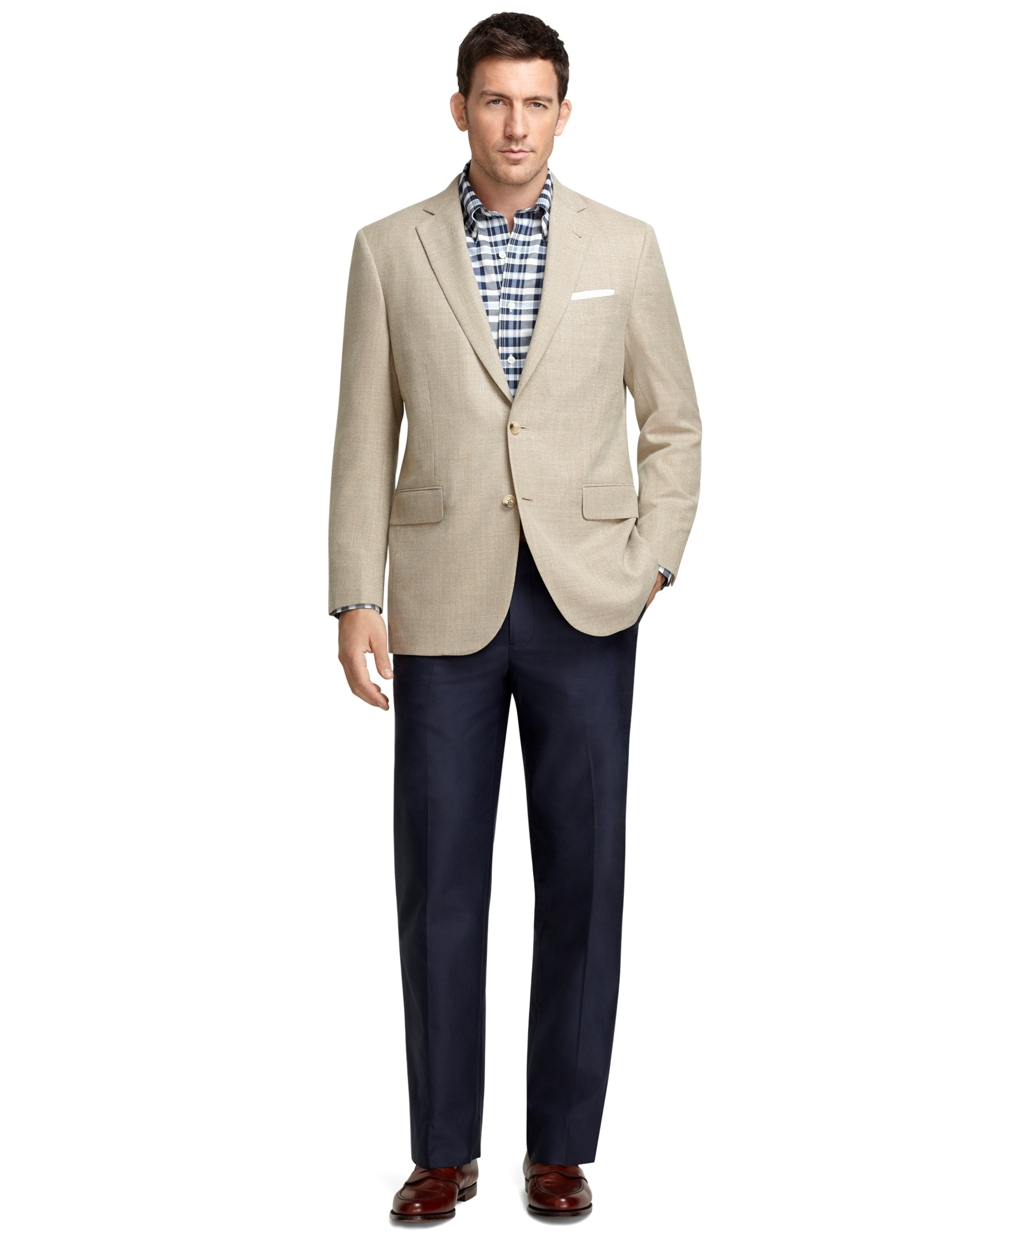 Lyst - Brooks Brothers Madison Fit Hopsack Sport Coat in Natural for Men